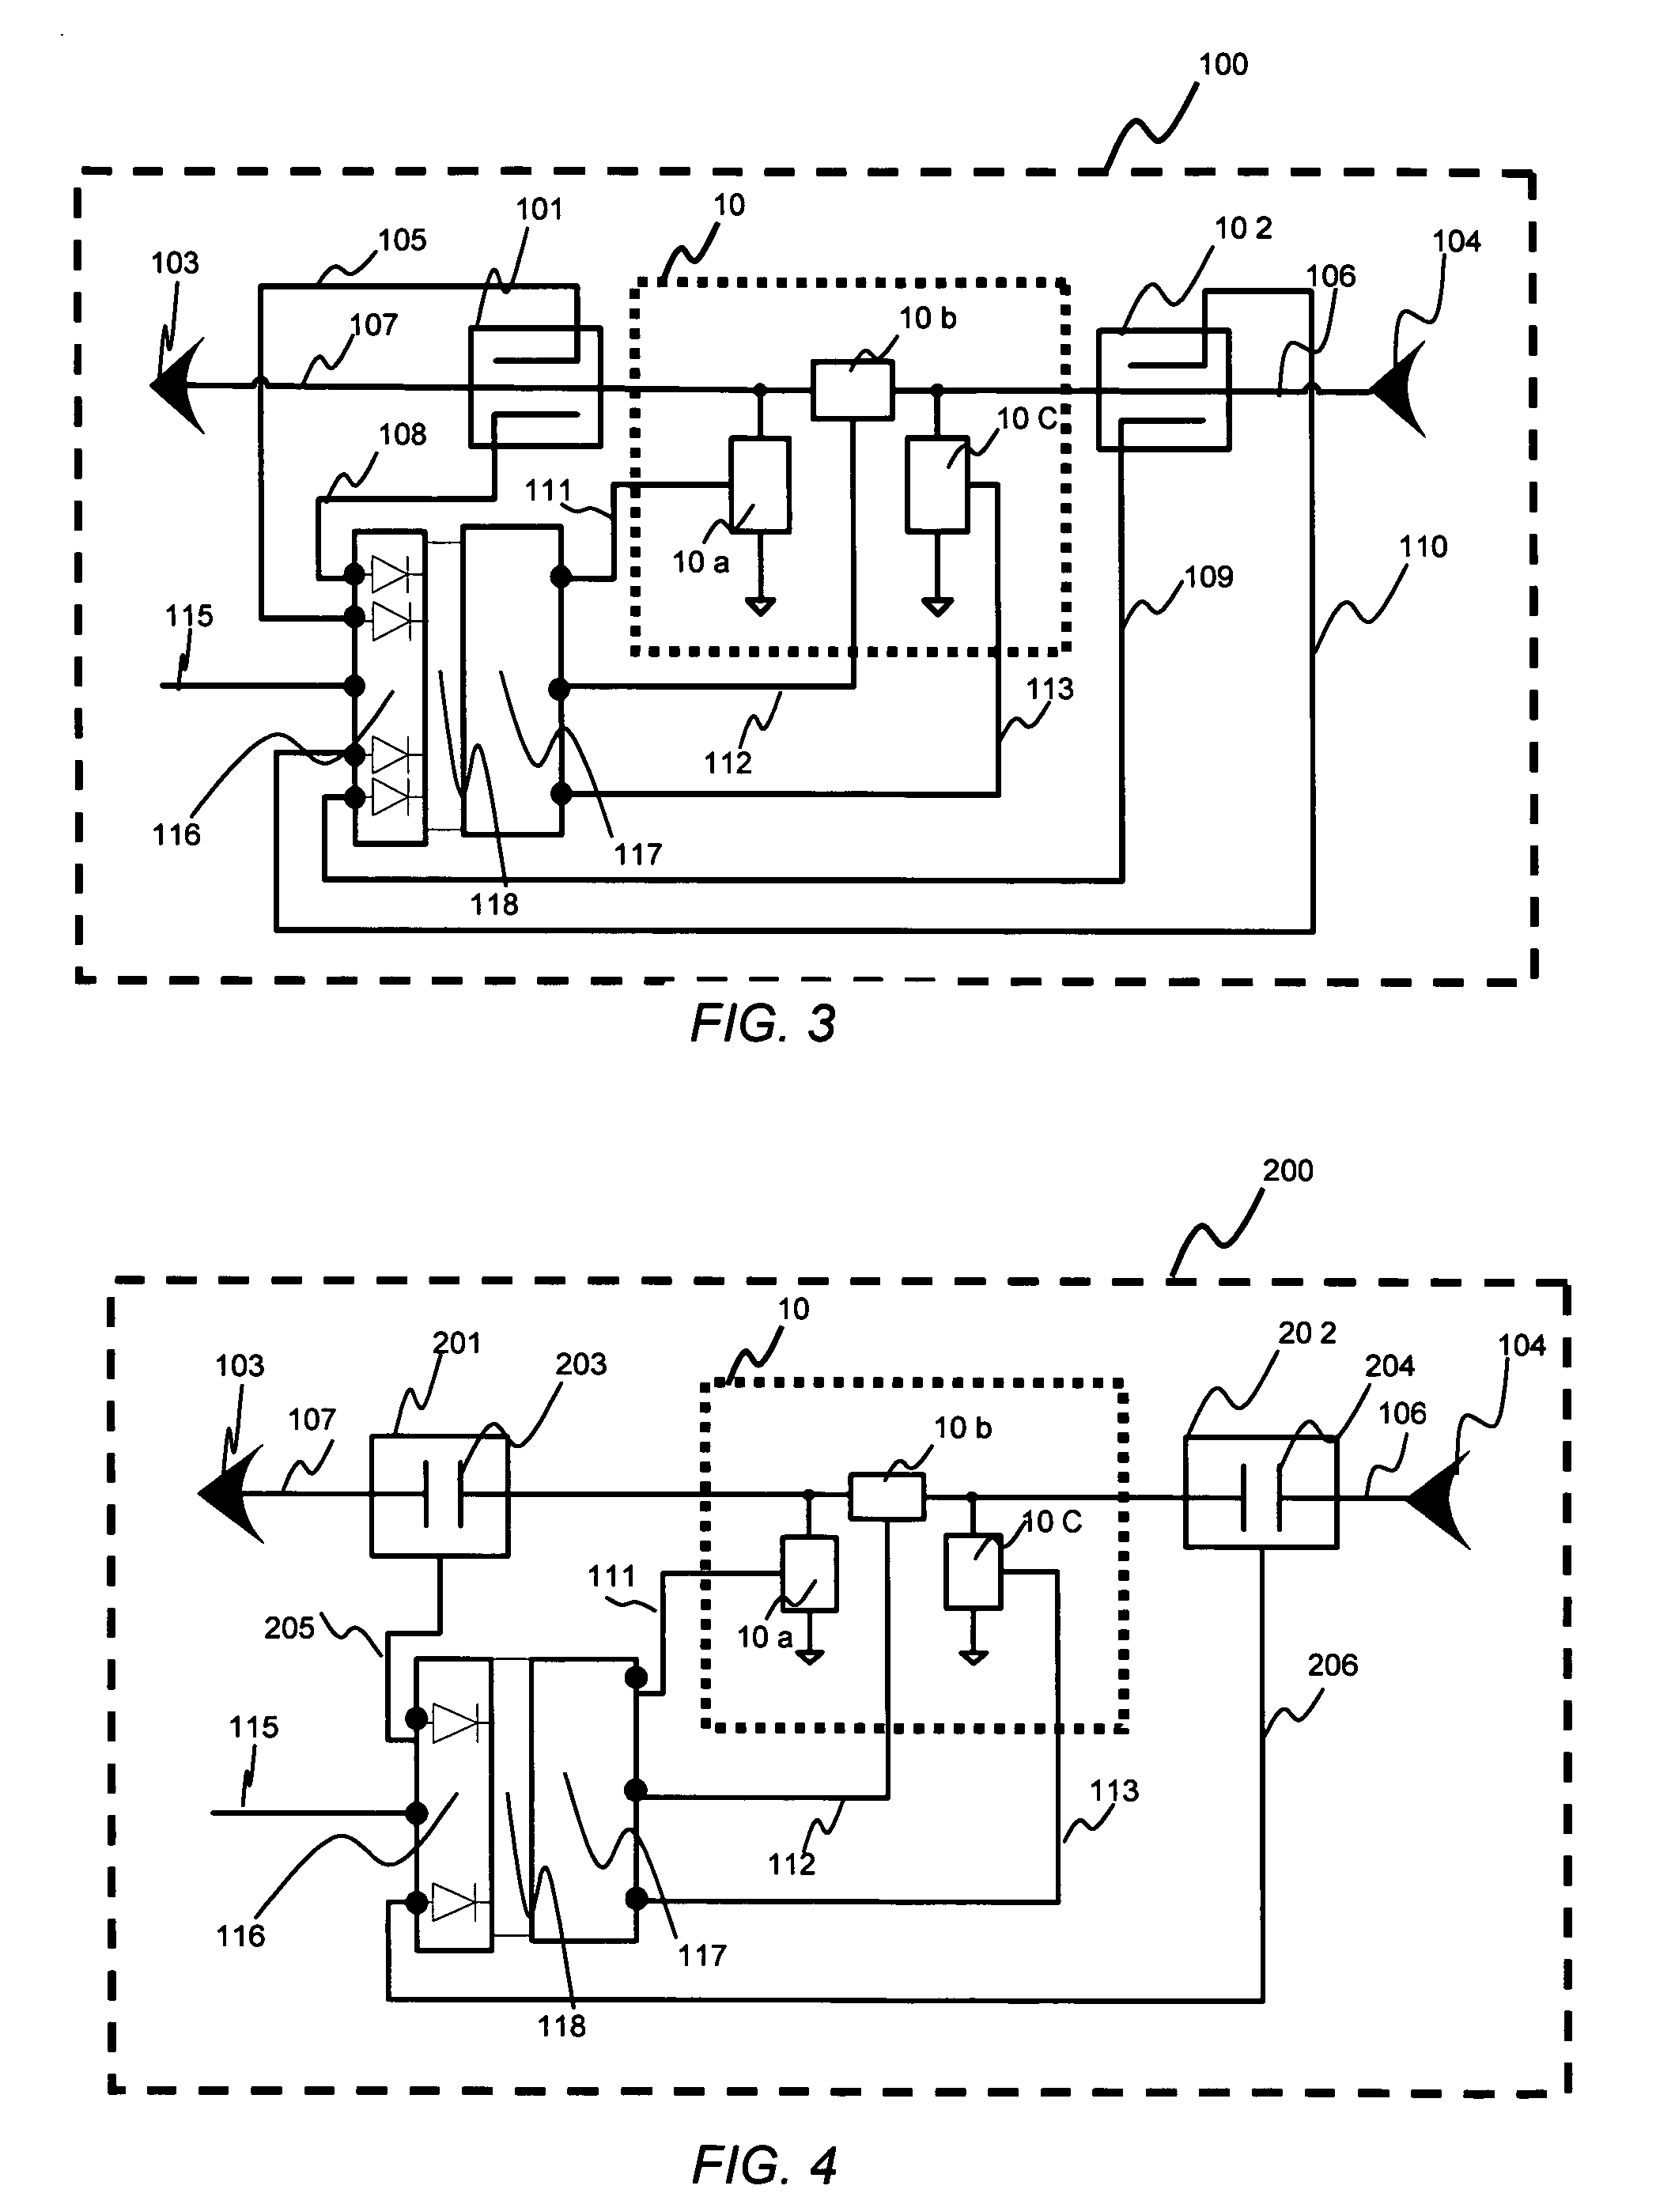 Tunable microwave devices with auto-adjusting matching circuit